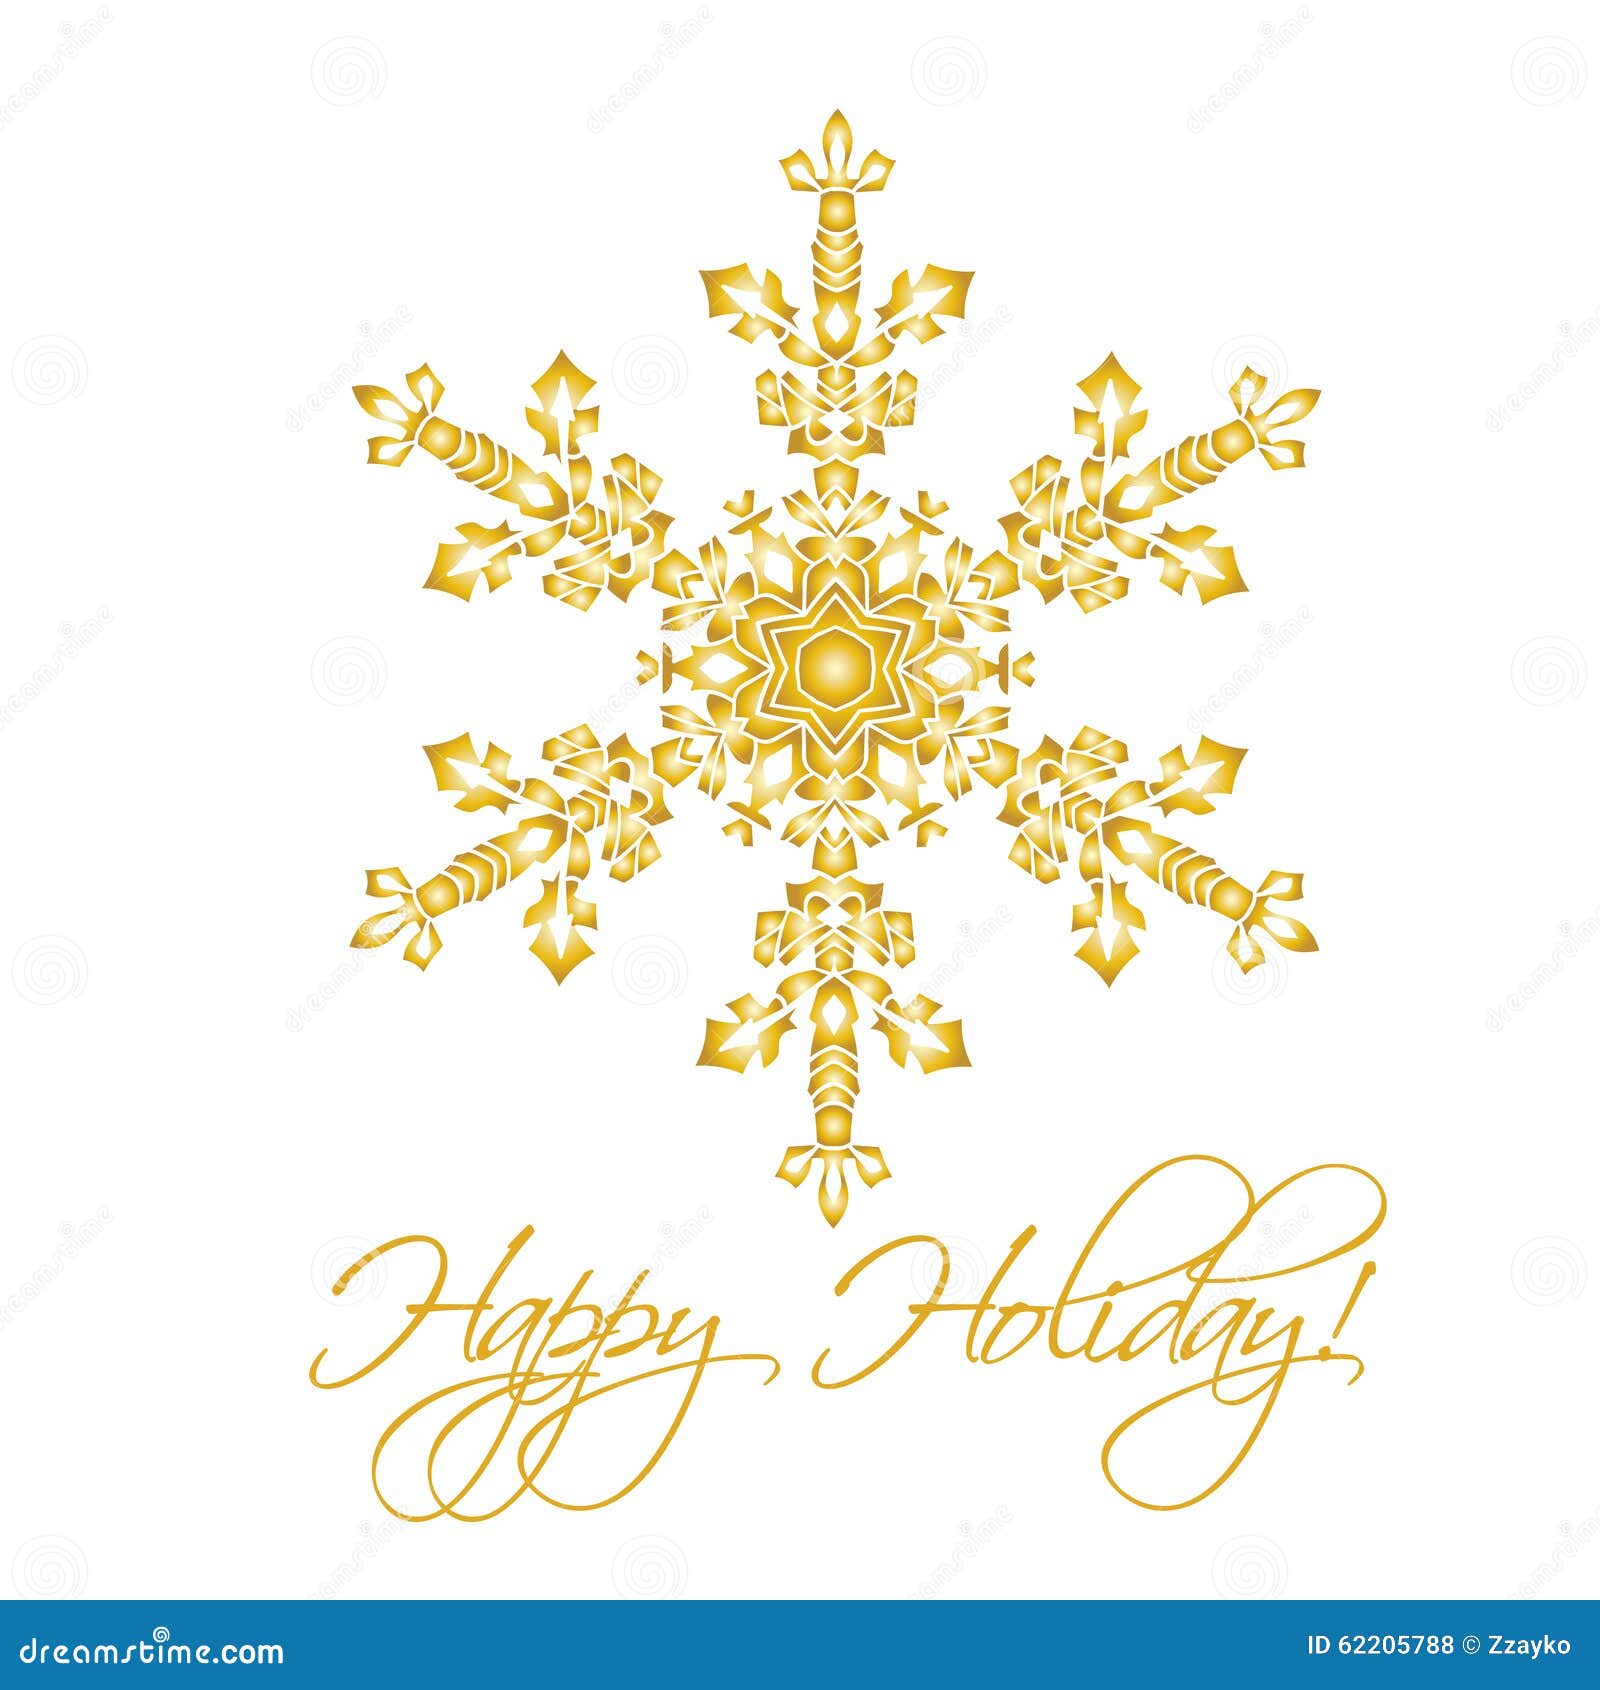 Christmas Background with Hand-drawn Realistic Snowflake on White ...